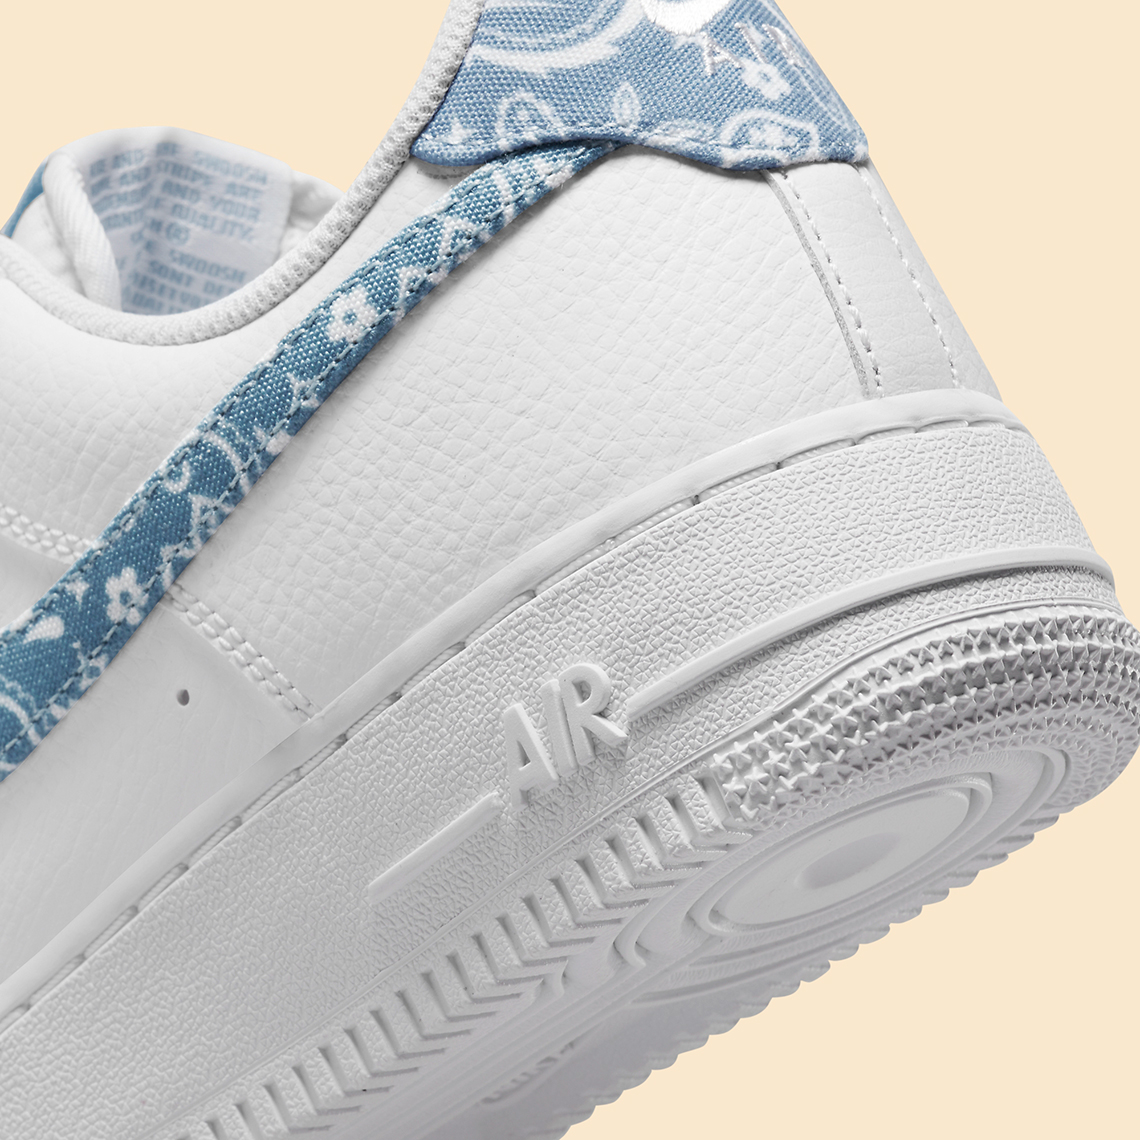 Nike Air Force 1 Low Paisley White Worn Blue Dh4406 100 6